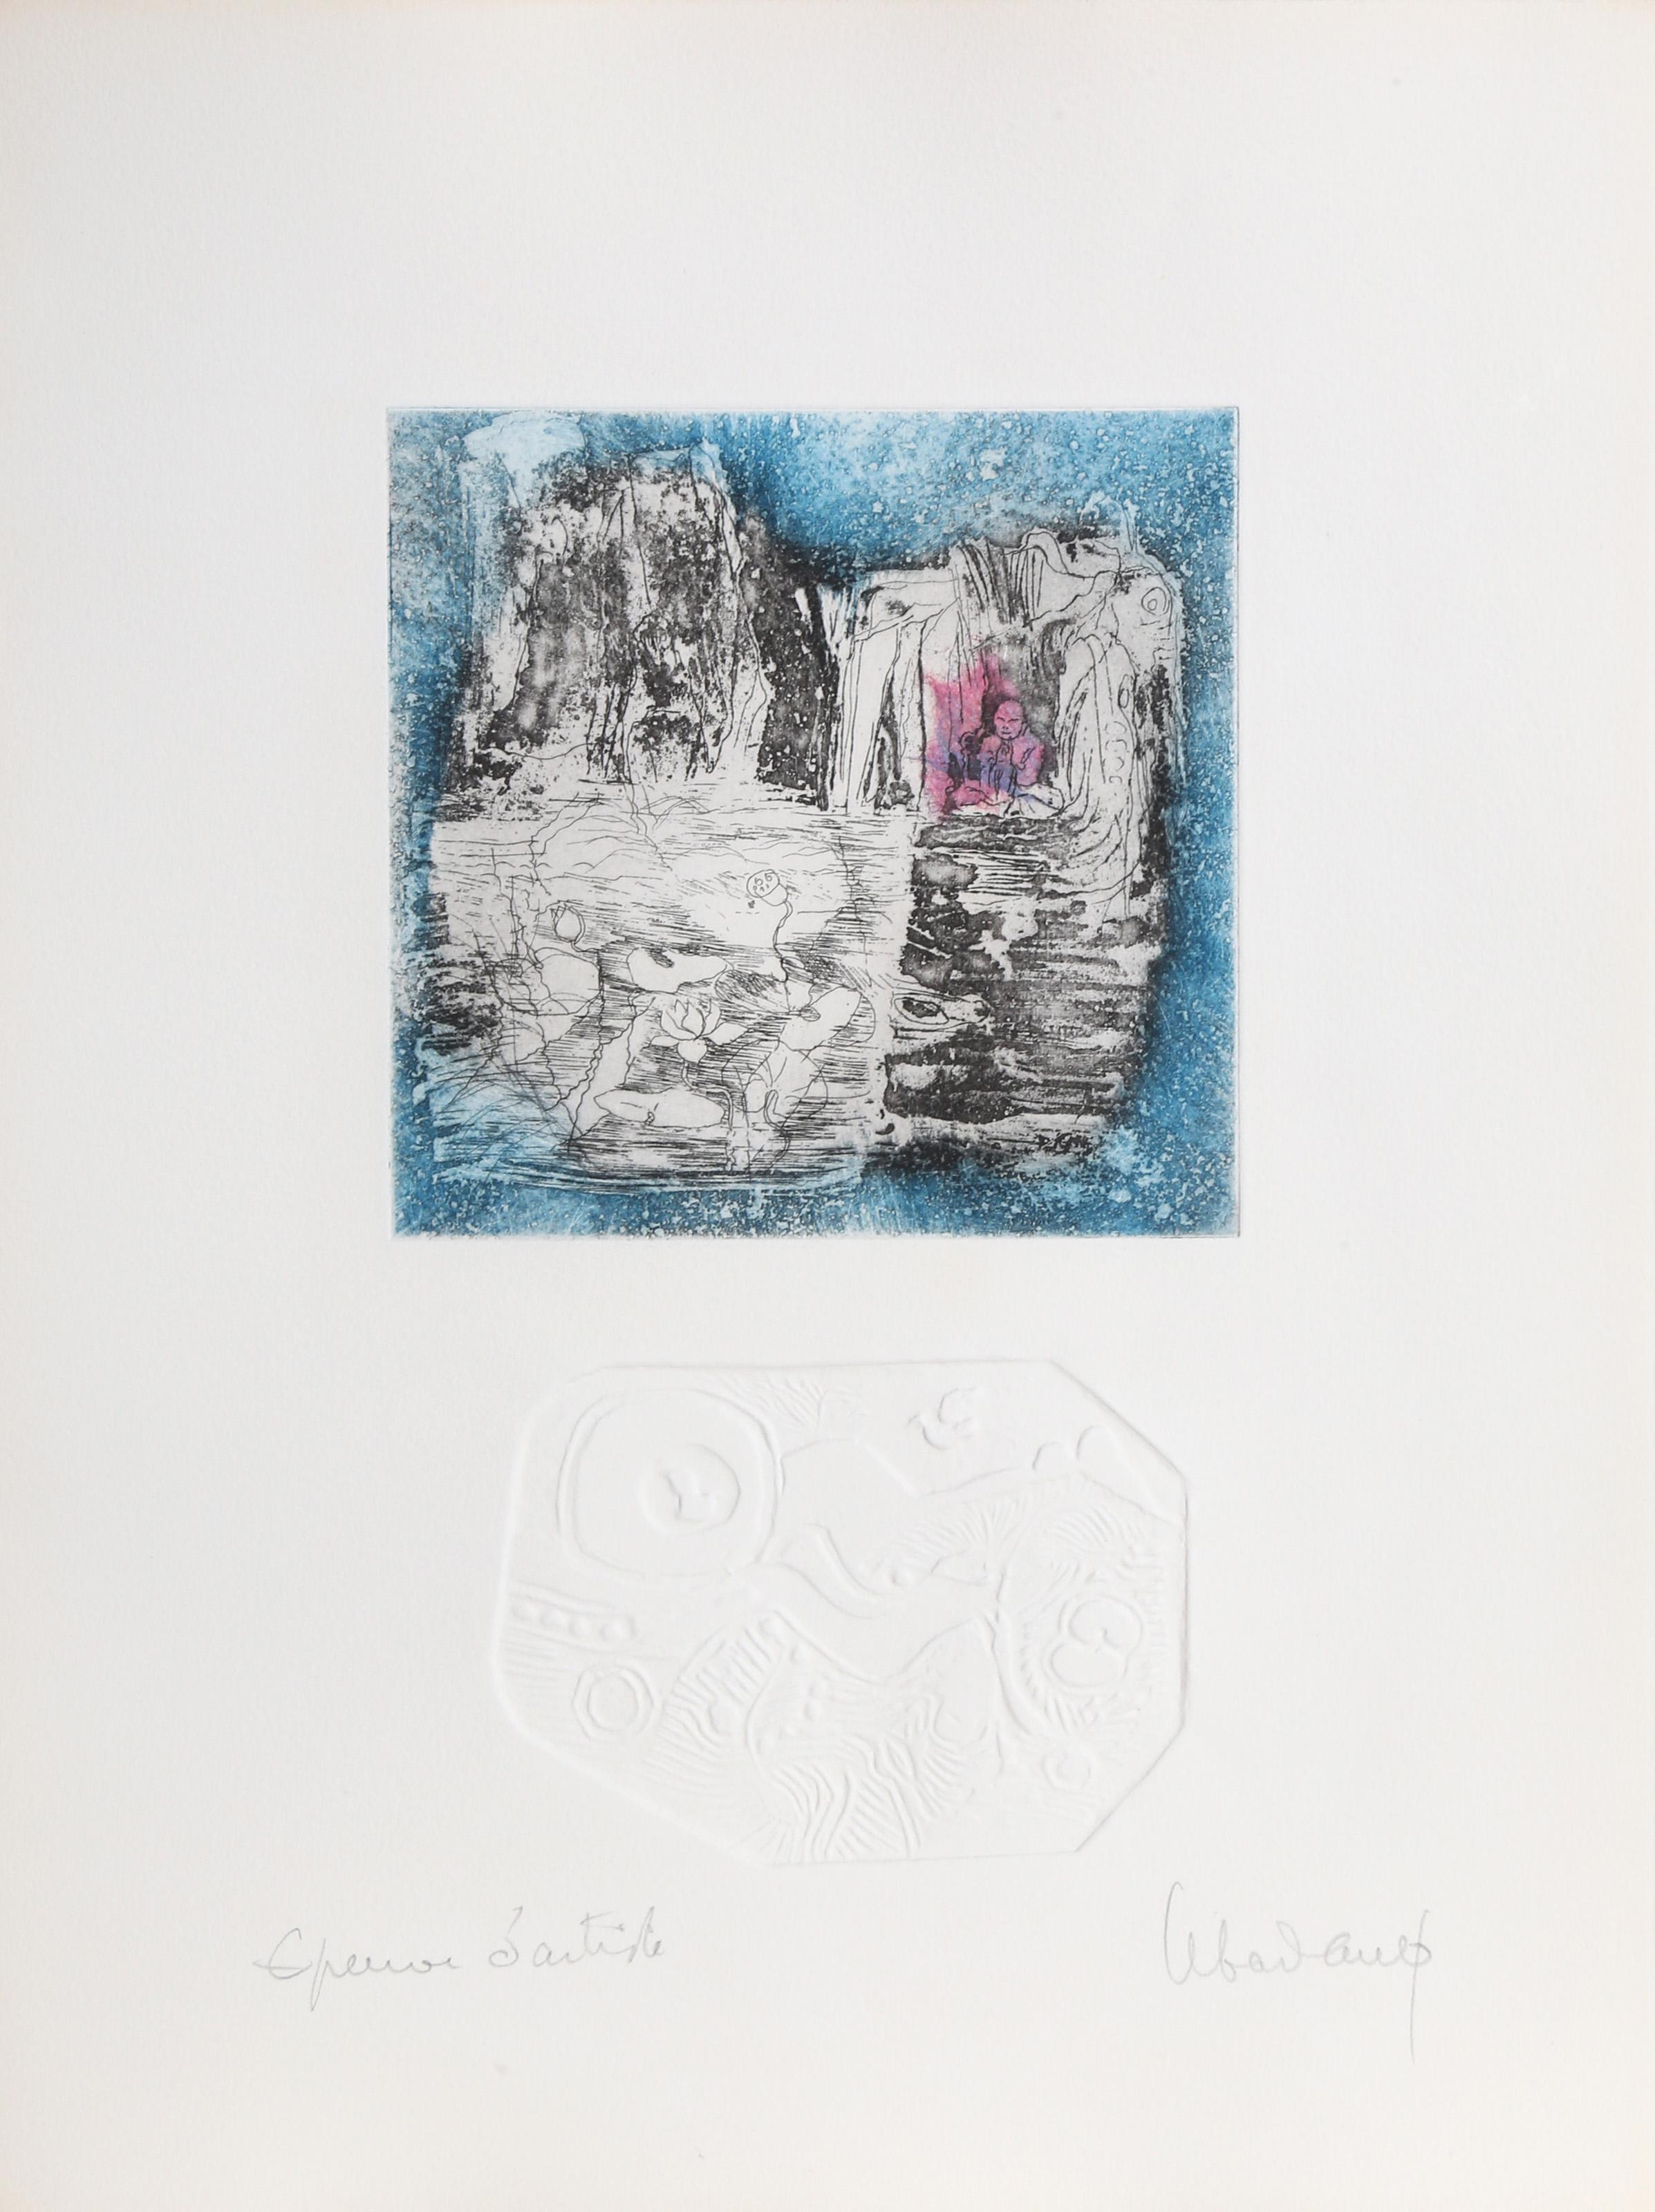 Lebadang (aka Hoi) -  Meditation in Space. Year: circa 1970, Medium: Etching with Relief, signed and numbered in pencil, Edition: EA, Size: 15  x 11 in. (38.1  x 27.94 cm) 